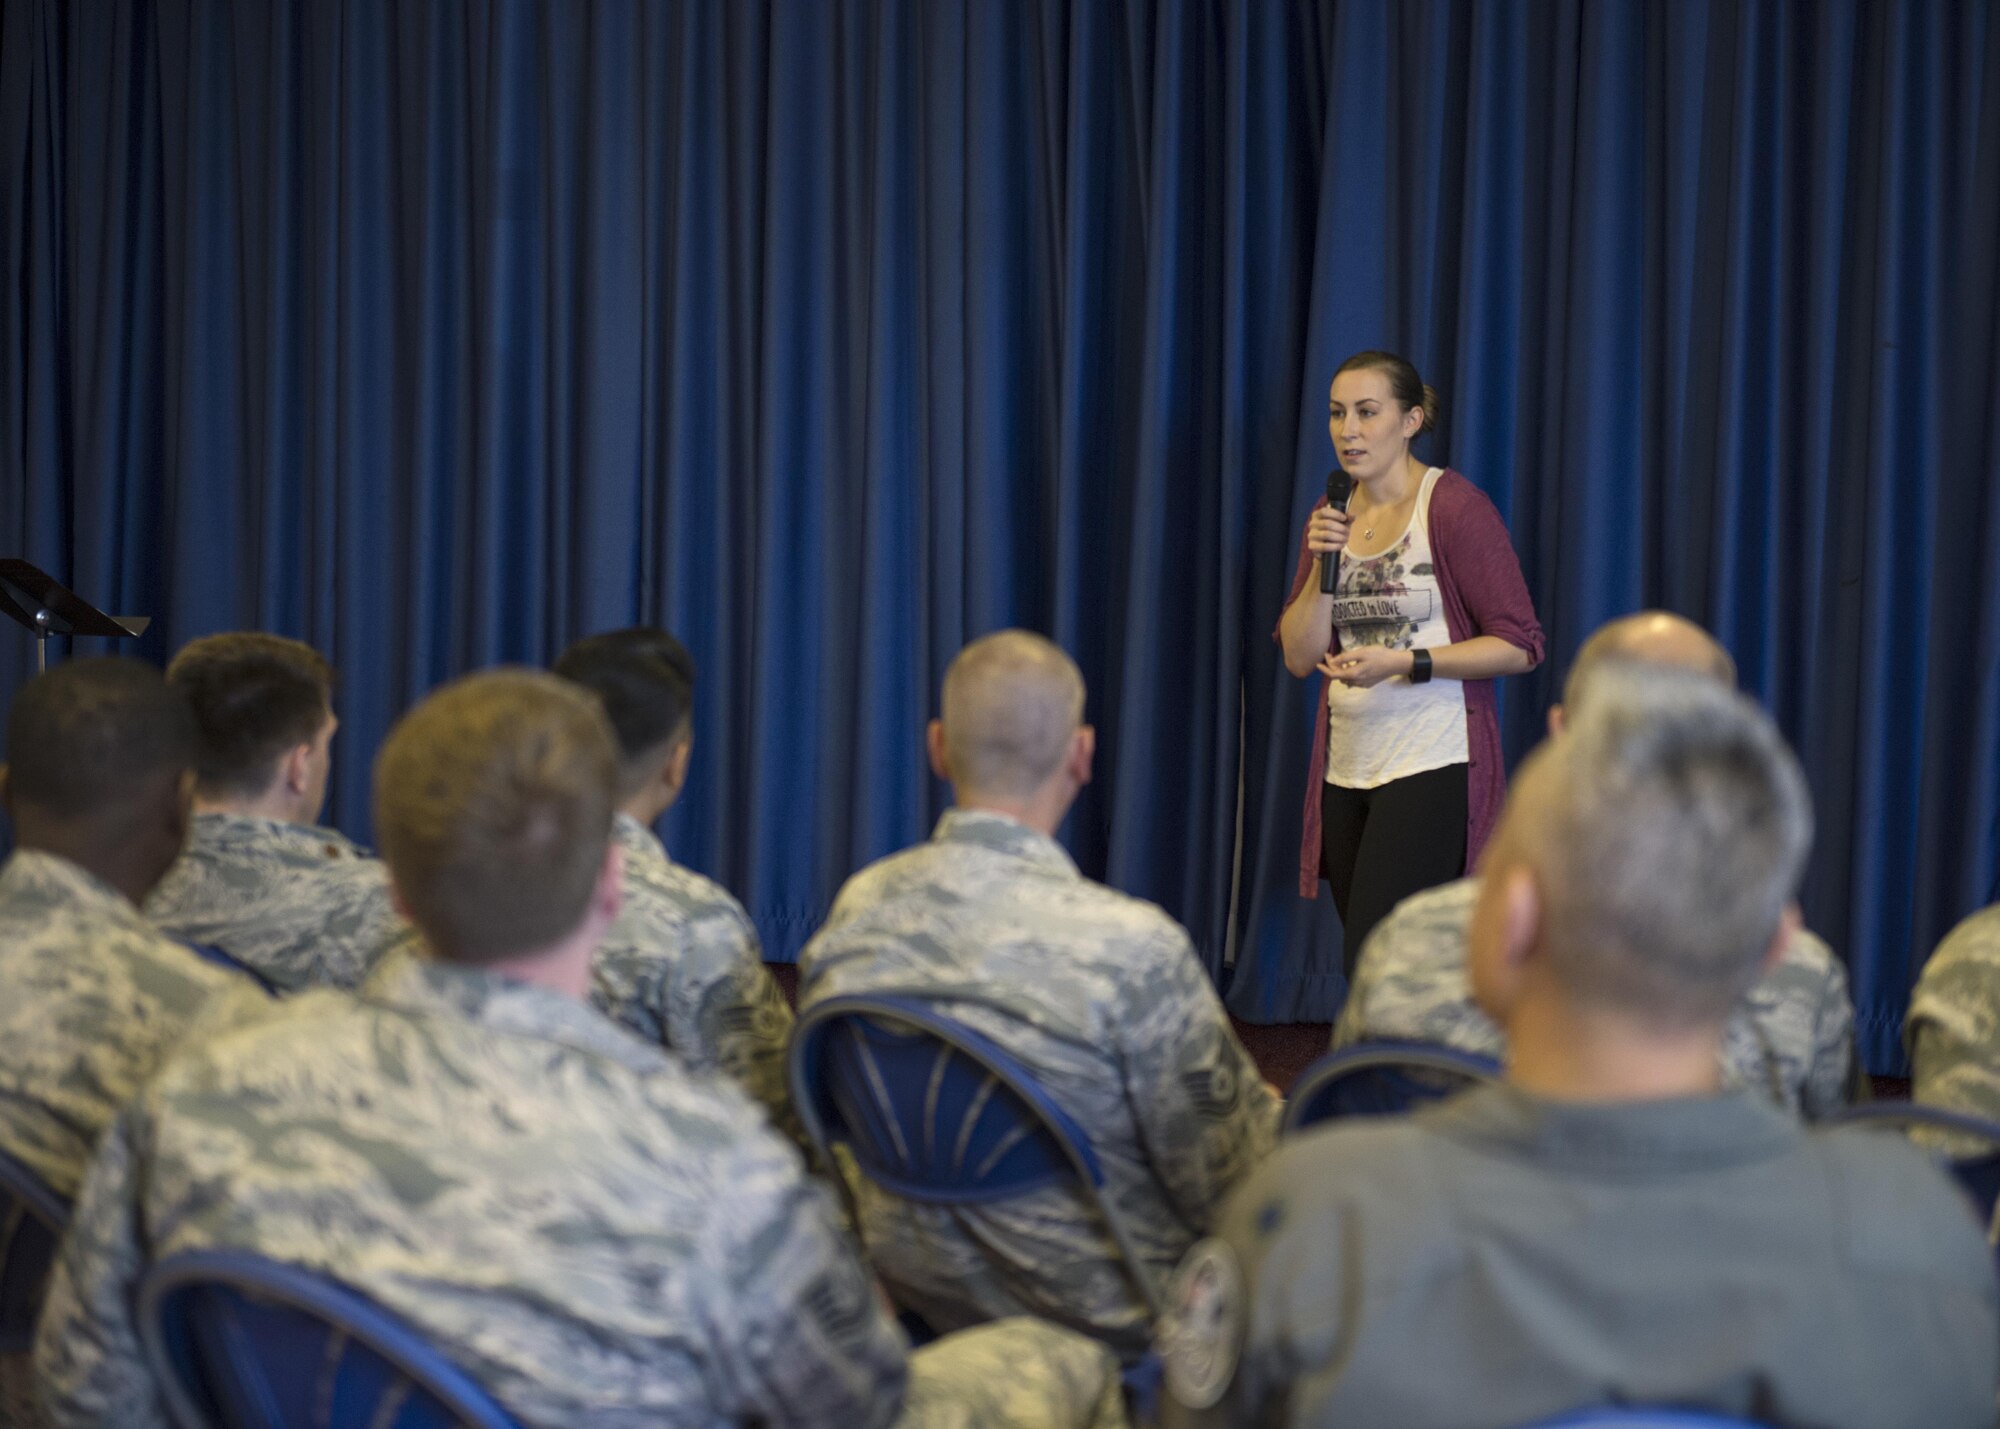 U.S. Air Force Staff Sgt. Julie Stich, 48th Medical Group radiology technician and Green Dot implementer, speaks to Airmen during a Green Dot general overview training at Royal Air Force Lakenheath, England, Sept. 9. The training revolves around teaching Airmen how to recognize, analyze and respond to an incident involving interpersonal violence. (U.S. Air Force photo/Senior Airman Malcolm Mayfield)